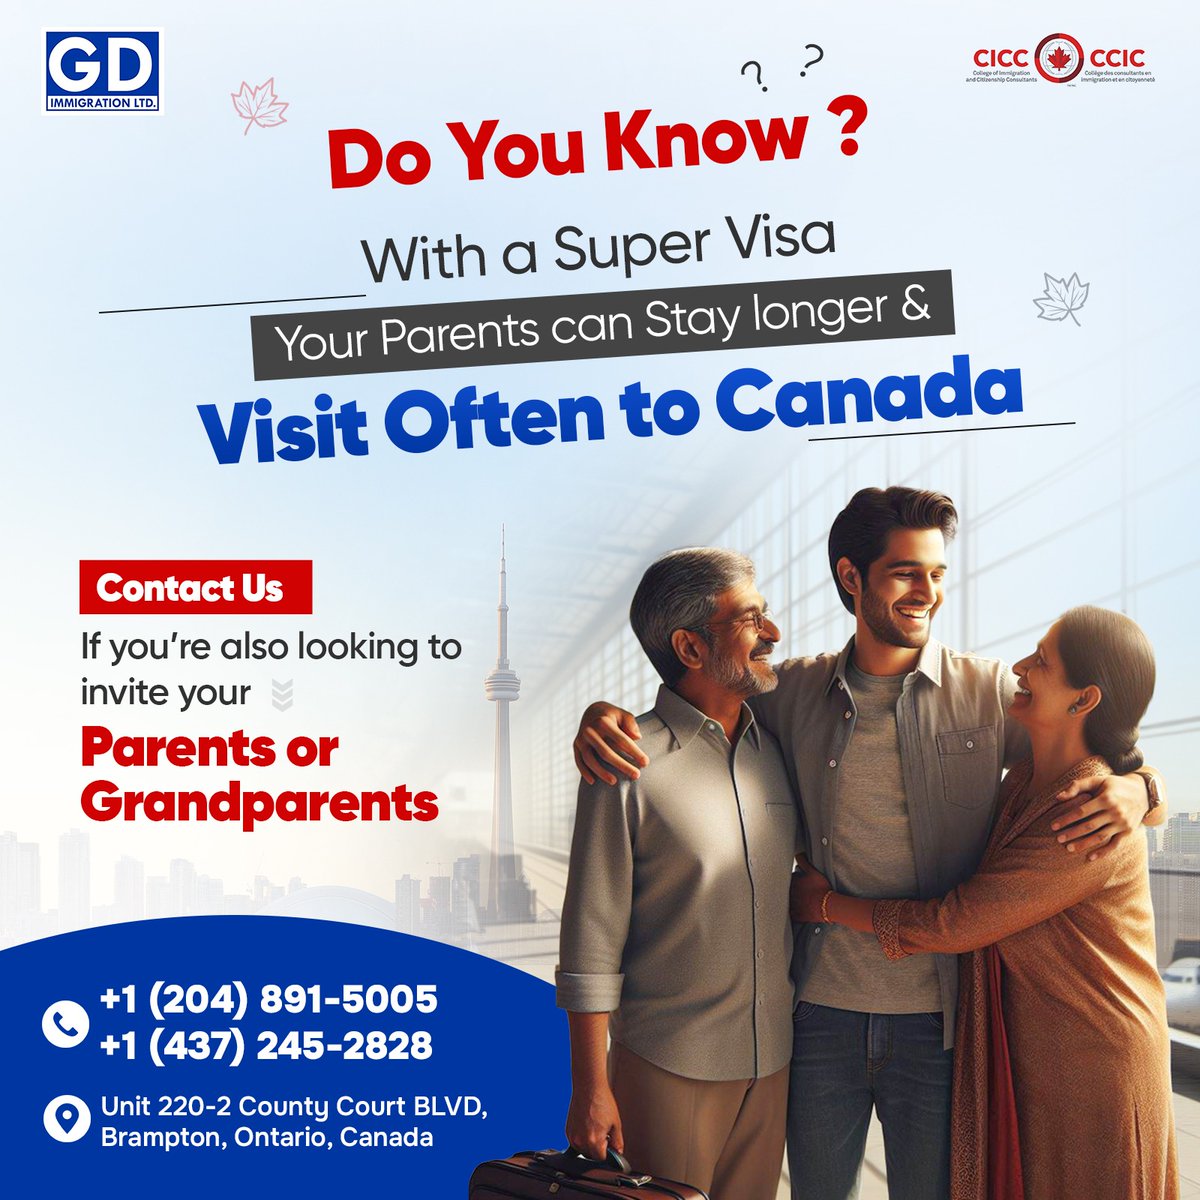 Bring your parents or grandparents closer with Canada's Super Visa🍁! They can stay longer and visit often, keeping family ties strong. 💖 Contact us.

#GDImmigration #SuperVisa #Canada #CanadaSuperVisa #Visa #ImmigrationConsultants #Brampton #SuperVisa #FamilyLove